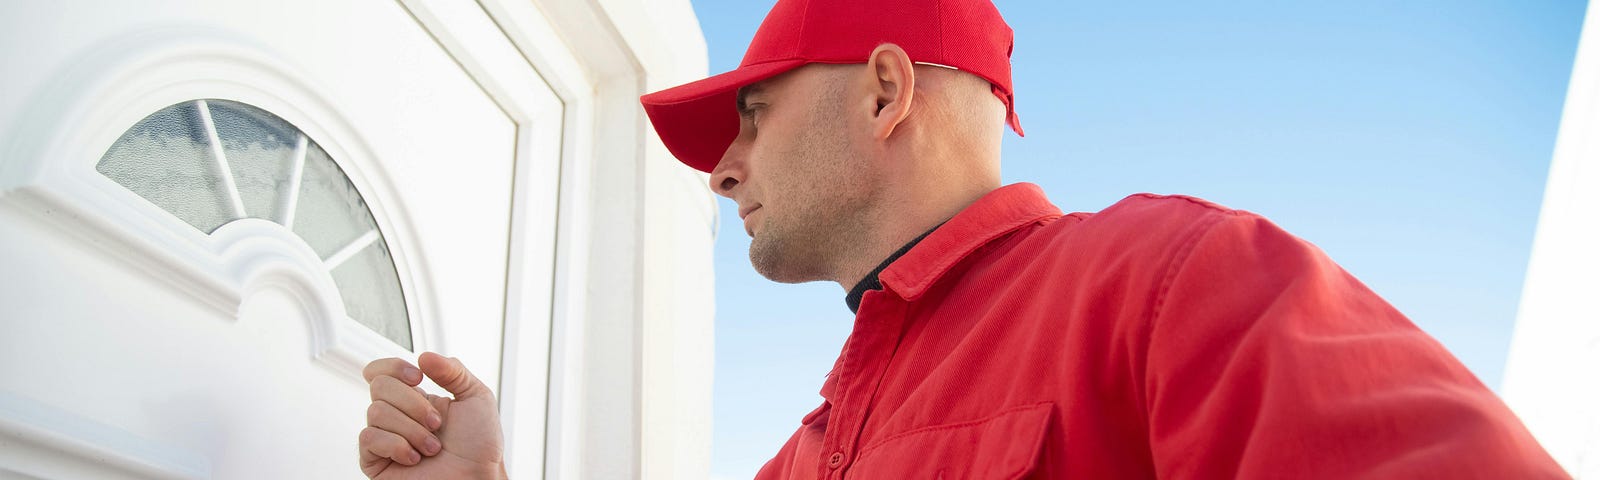 Man in red shirt and hat holding clipboard and knocking on home door